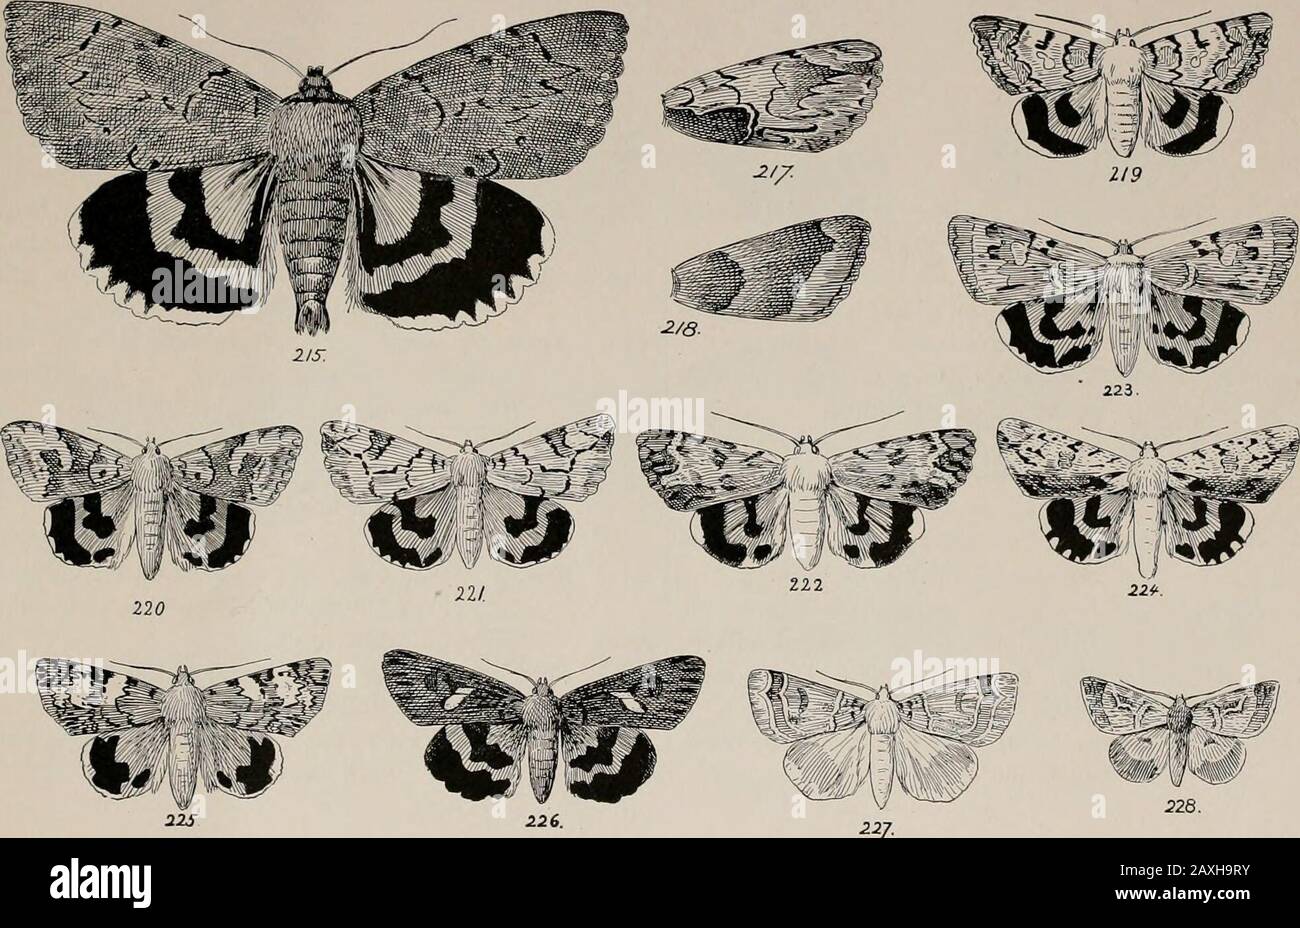 The night moths of New England, how to determine them readily . 2$ in. ; f. light gray, brown and black ; h. deep red and black. c. Plum and oak. 218. bait in: 2] in.; light and dark brown bands; sometimes dark blue graywithout light marks ; h. orange. 219. polygama; if in.; f. gray, buff and black ; h. red and black. c. Hawthorn. 220. formula : if in. ; f. buff, gray, brown and black h. orange and black. 221. fratcrcula: i:, in. ; f. light buff, gray and black h. orange and black, c. Oak. 222. Catocctla prccclara: if in.; f. gray and black; h. orange and black. 223. gryneci: if in.; f. gray, Stock Photo